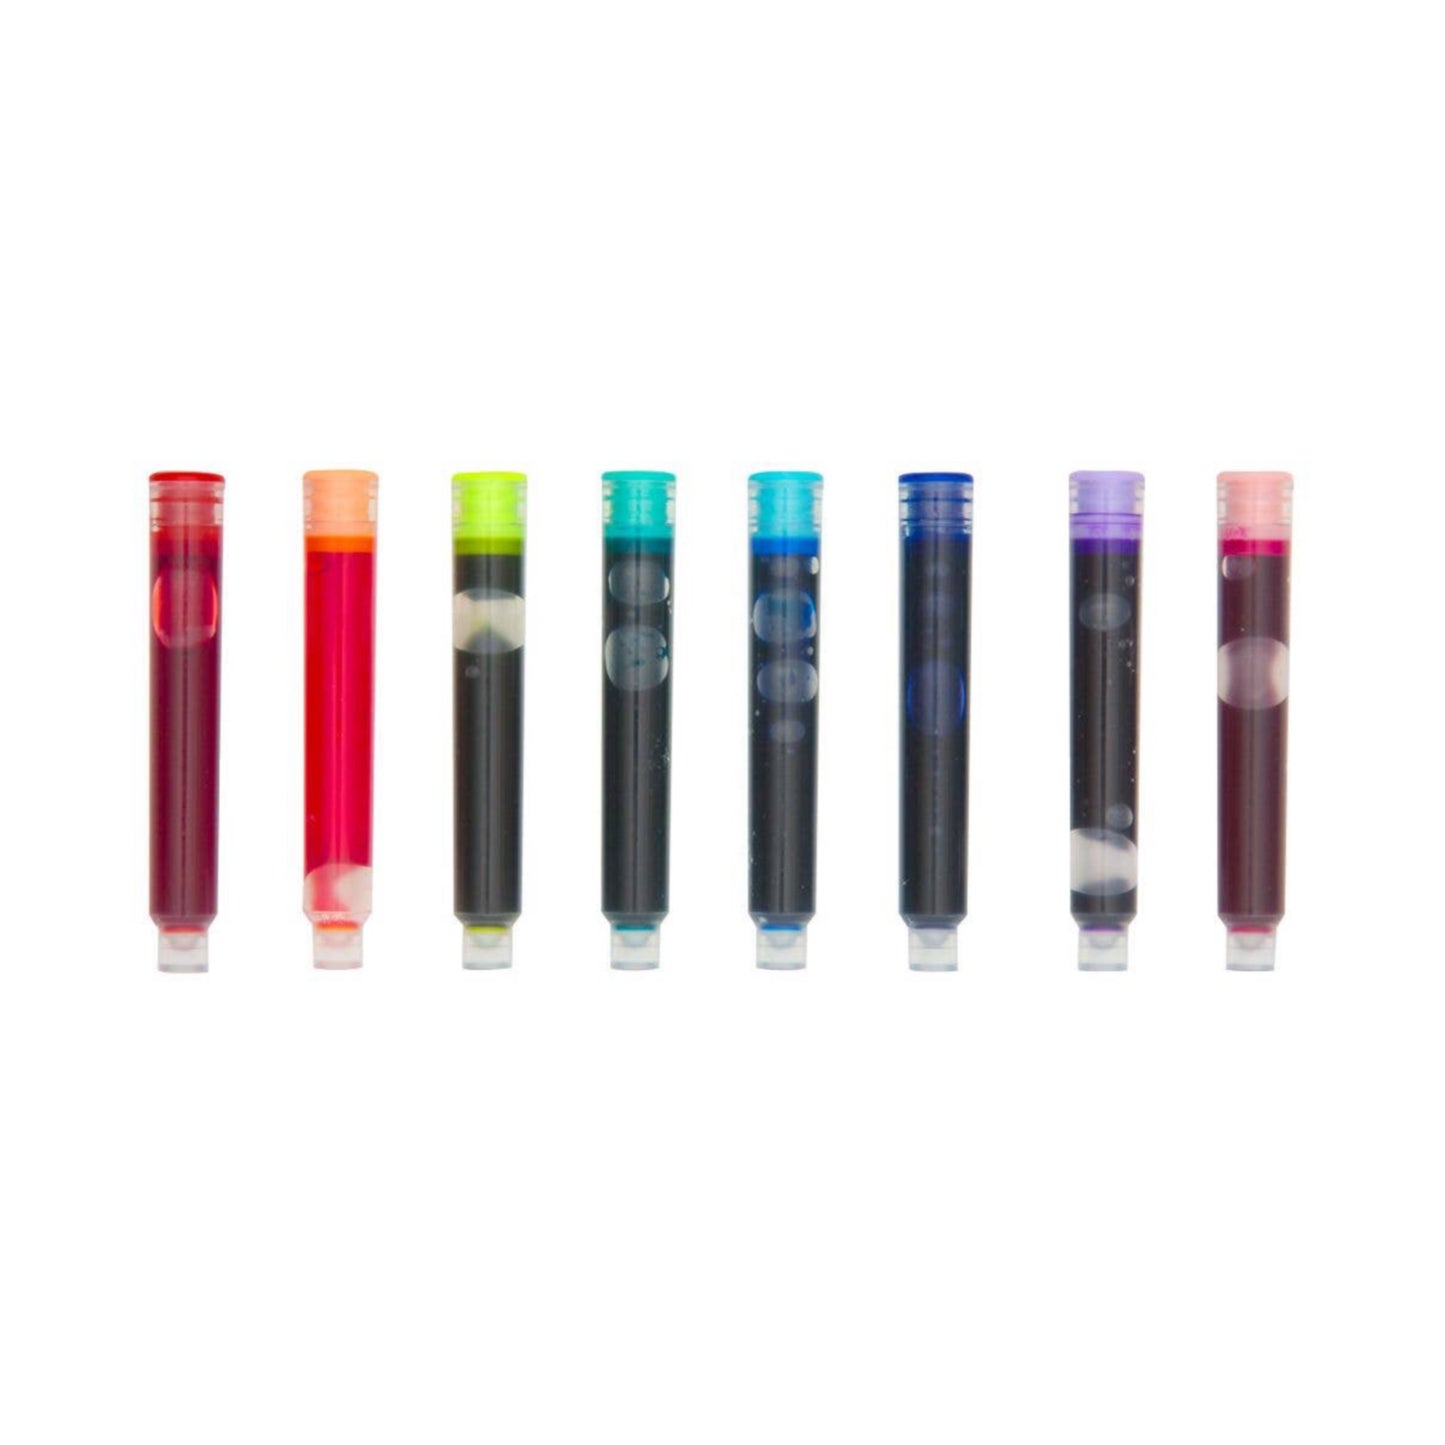 Ooly Color Write Fountain Pens Colored Ink Refills - by Ooly - K. A. Artist Shop